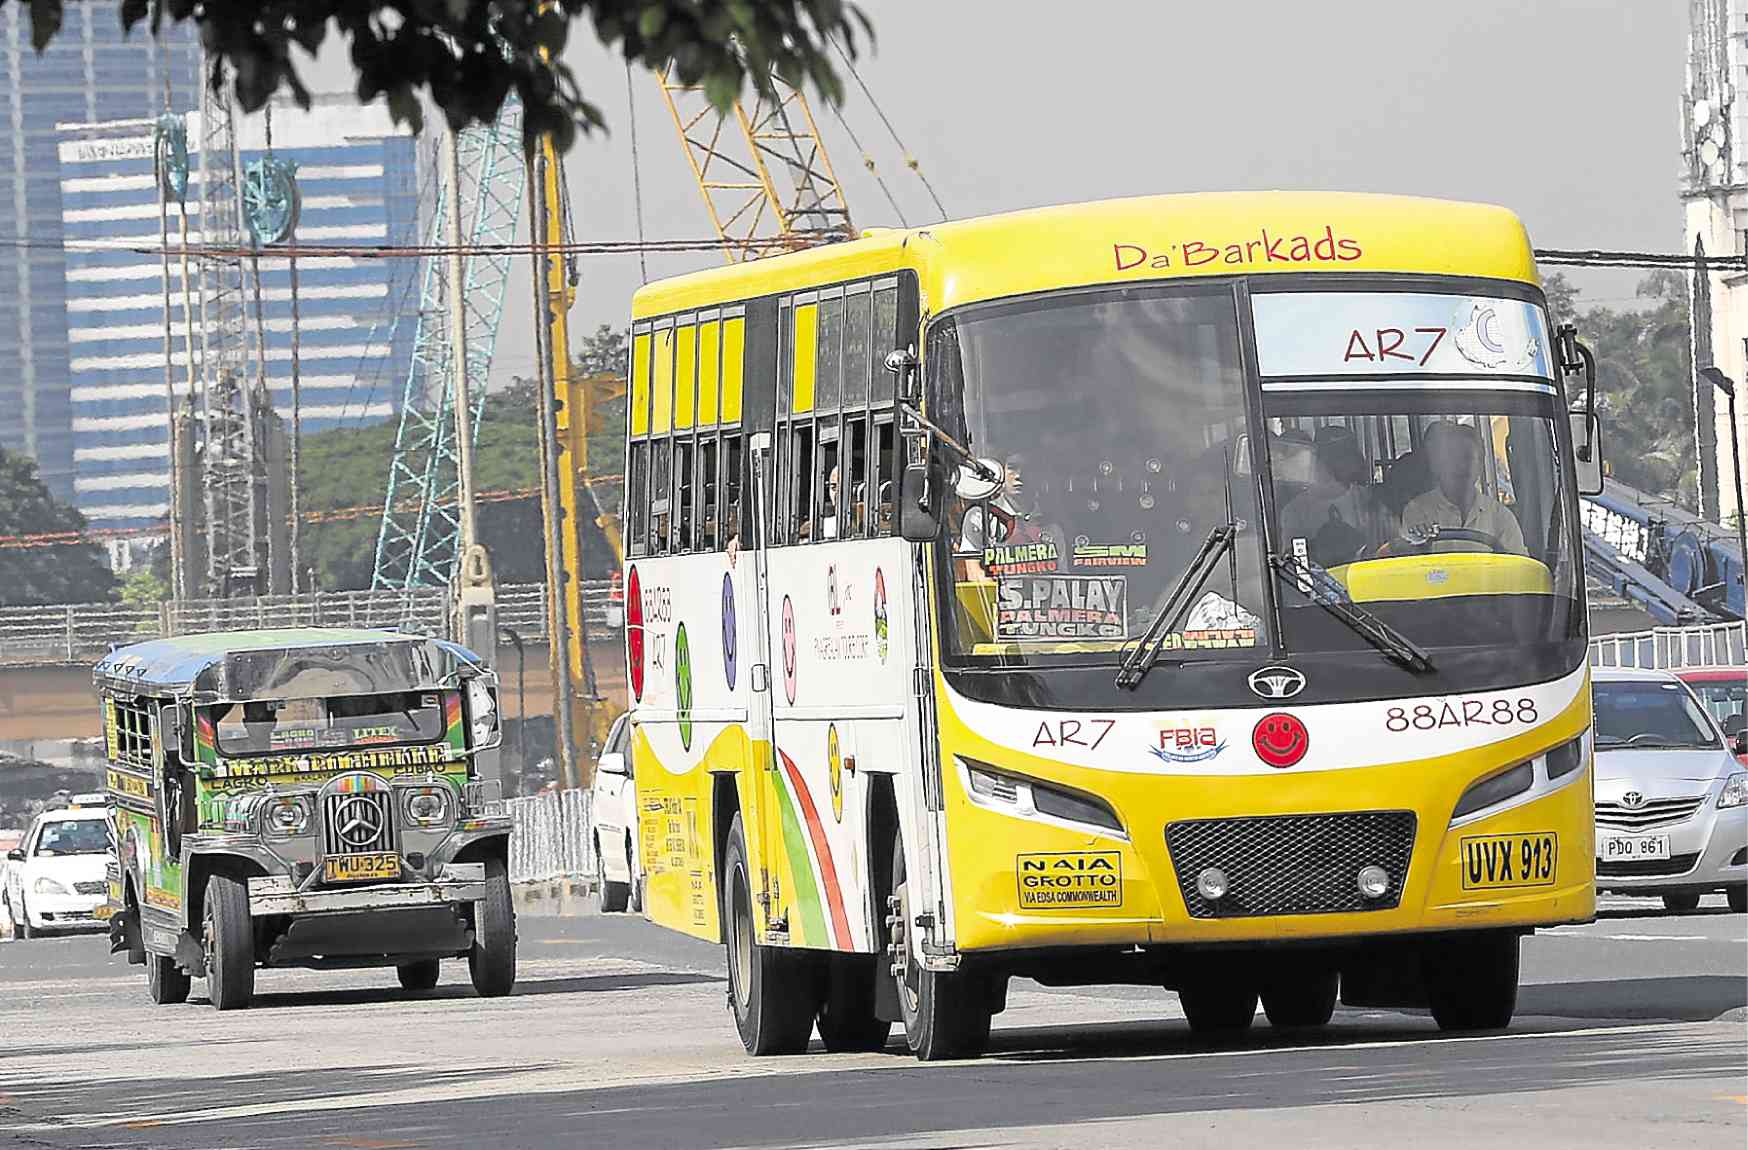 Policemen, soldiers get 20 percent fare discount on buses